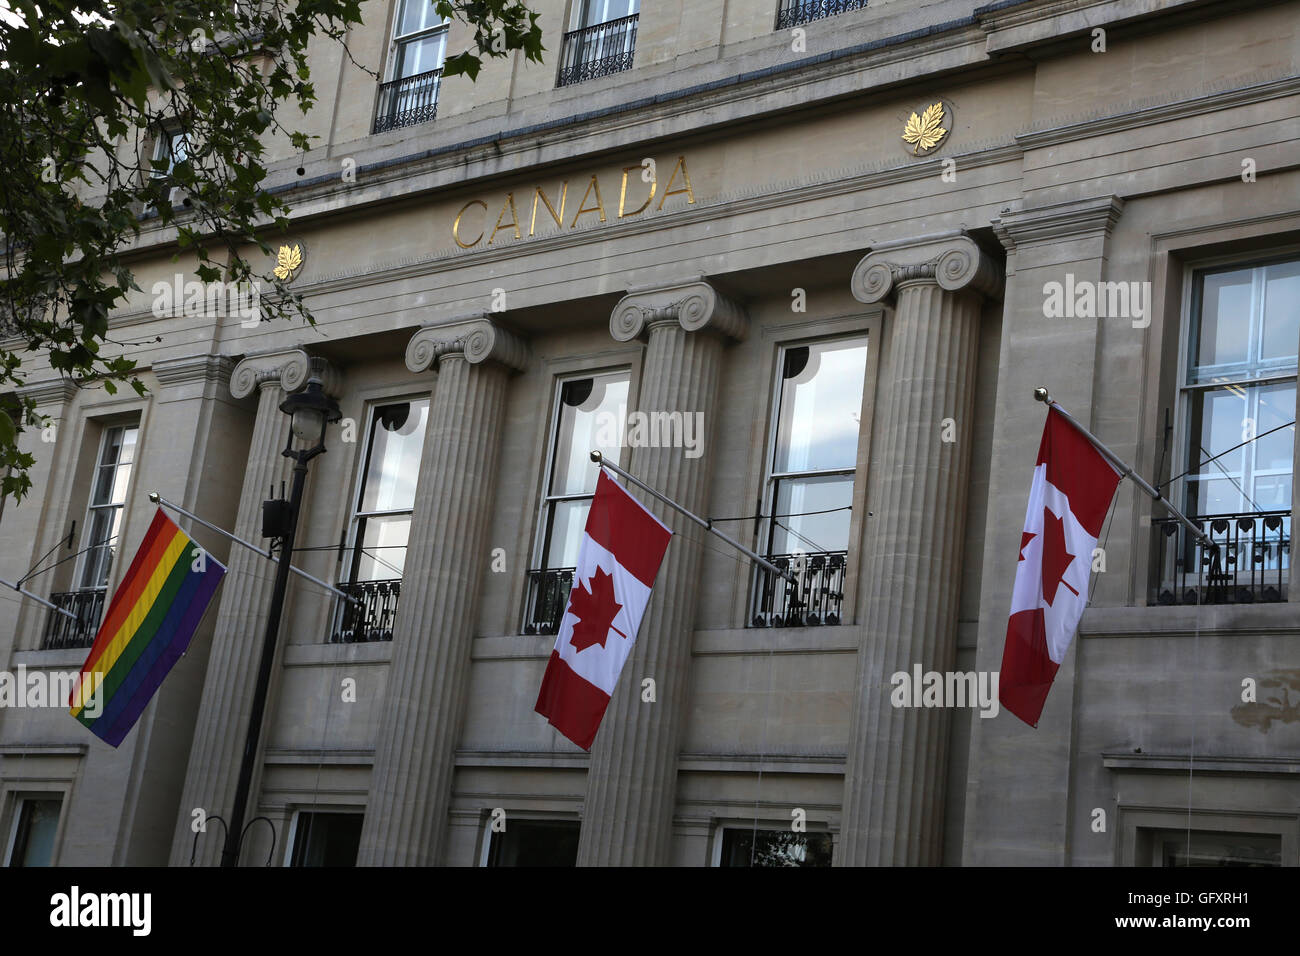 London England Trafalgar Square Canada House With Canadian Flags And The Gay Pride Flag Flying Stock Photo